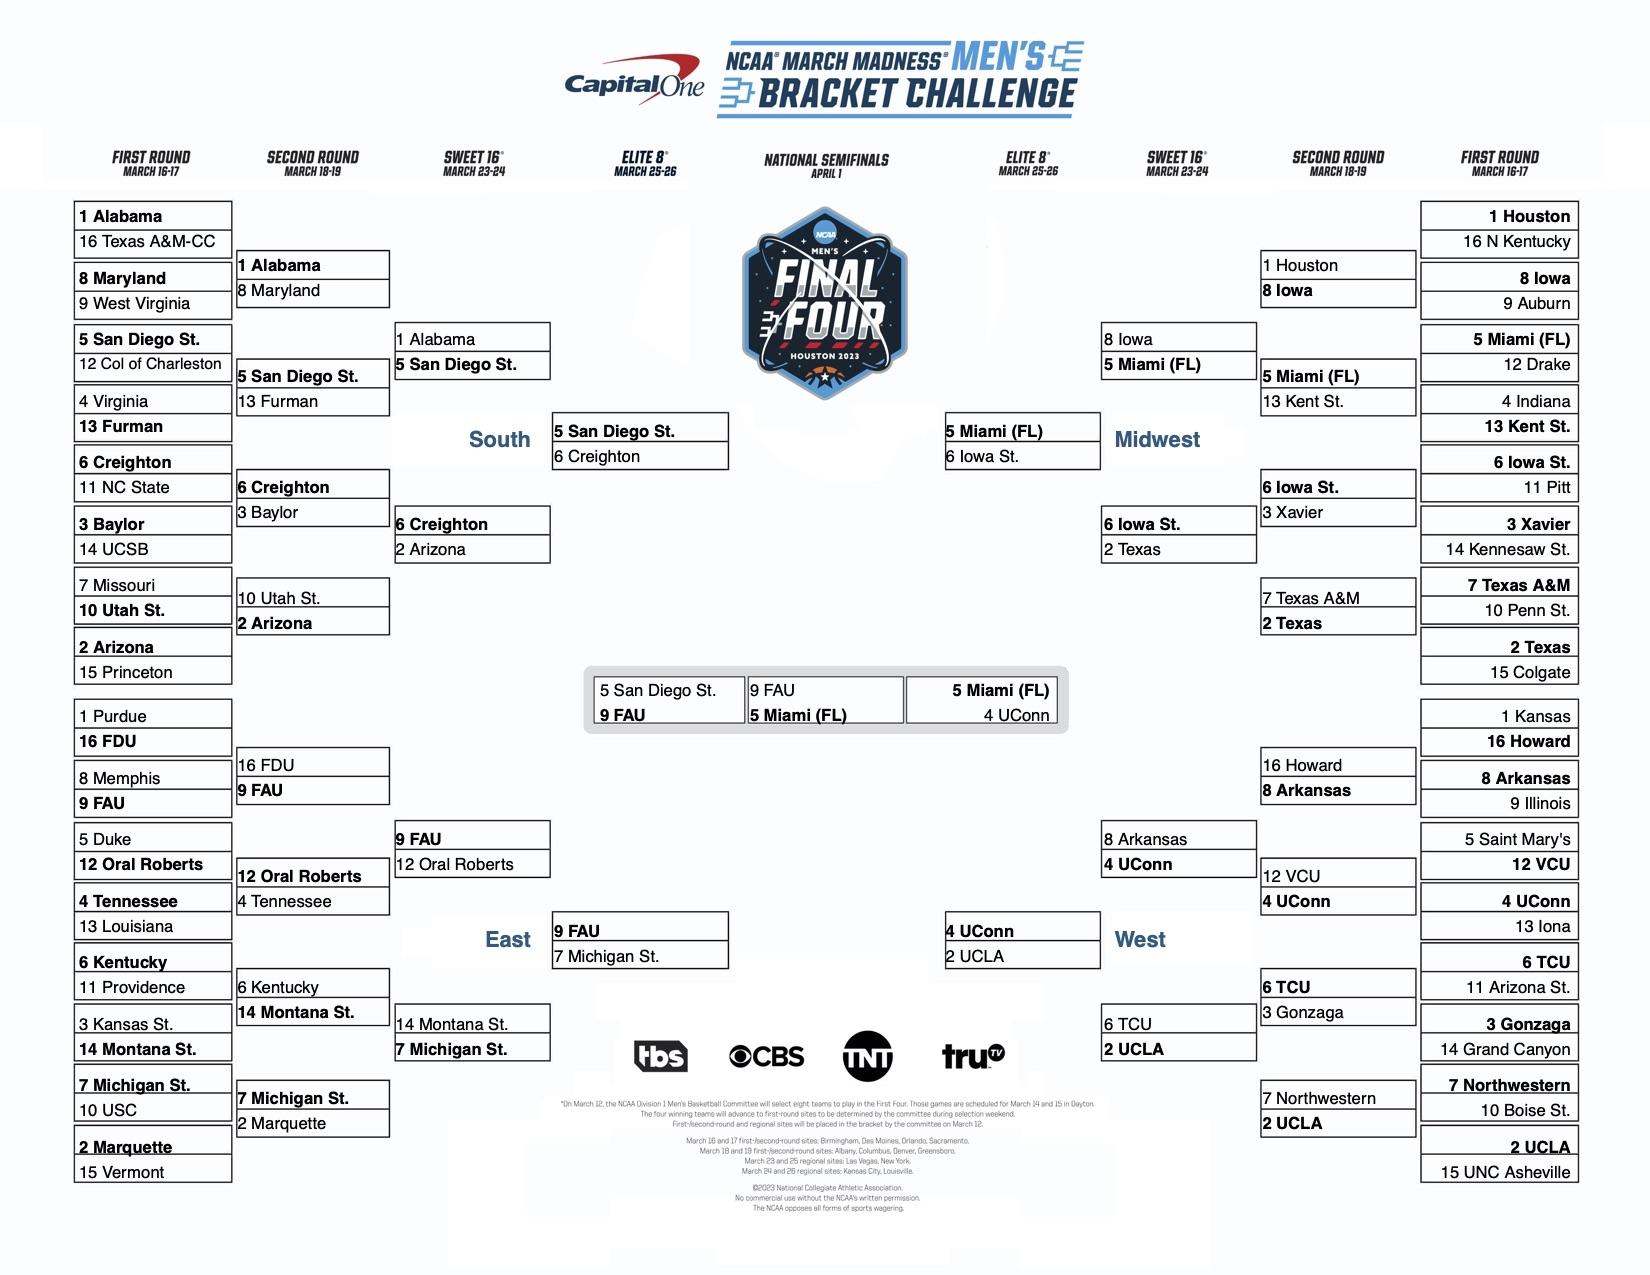 Here's how 6 people — somehow — predicted every Final Four team